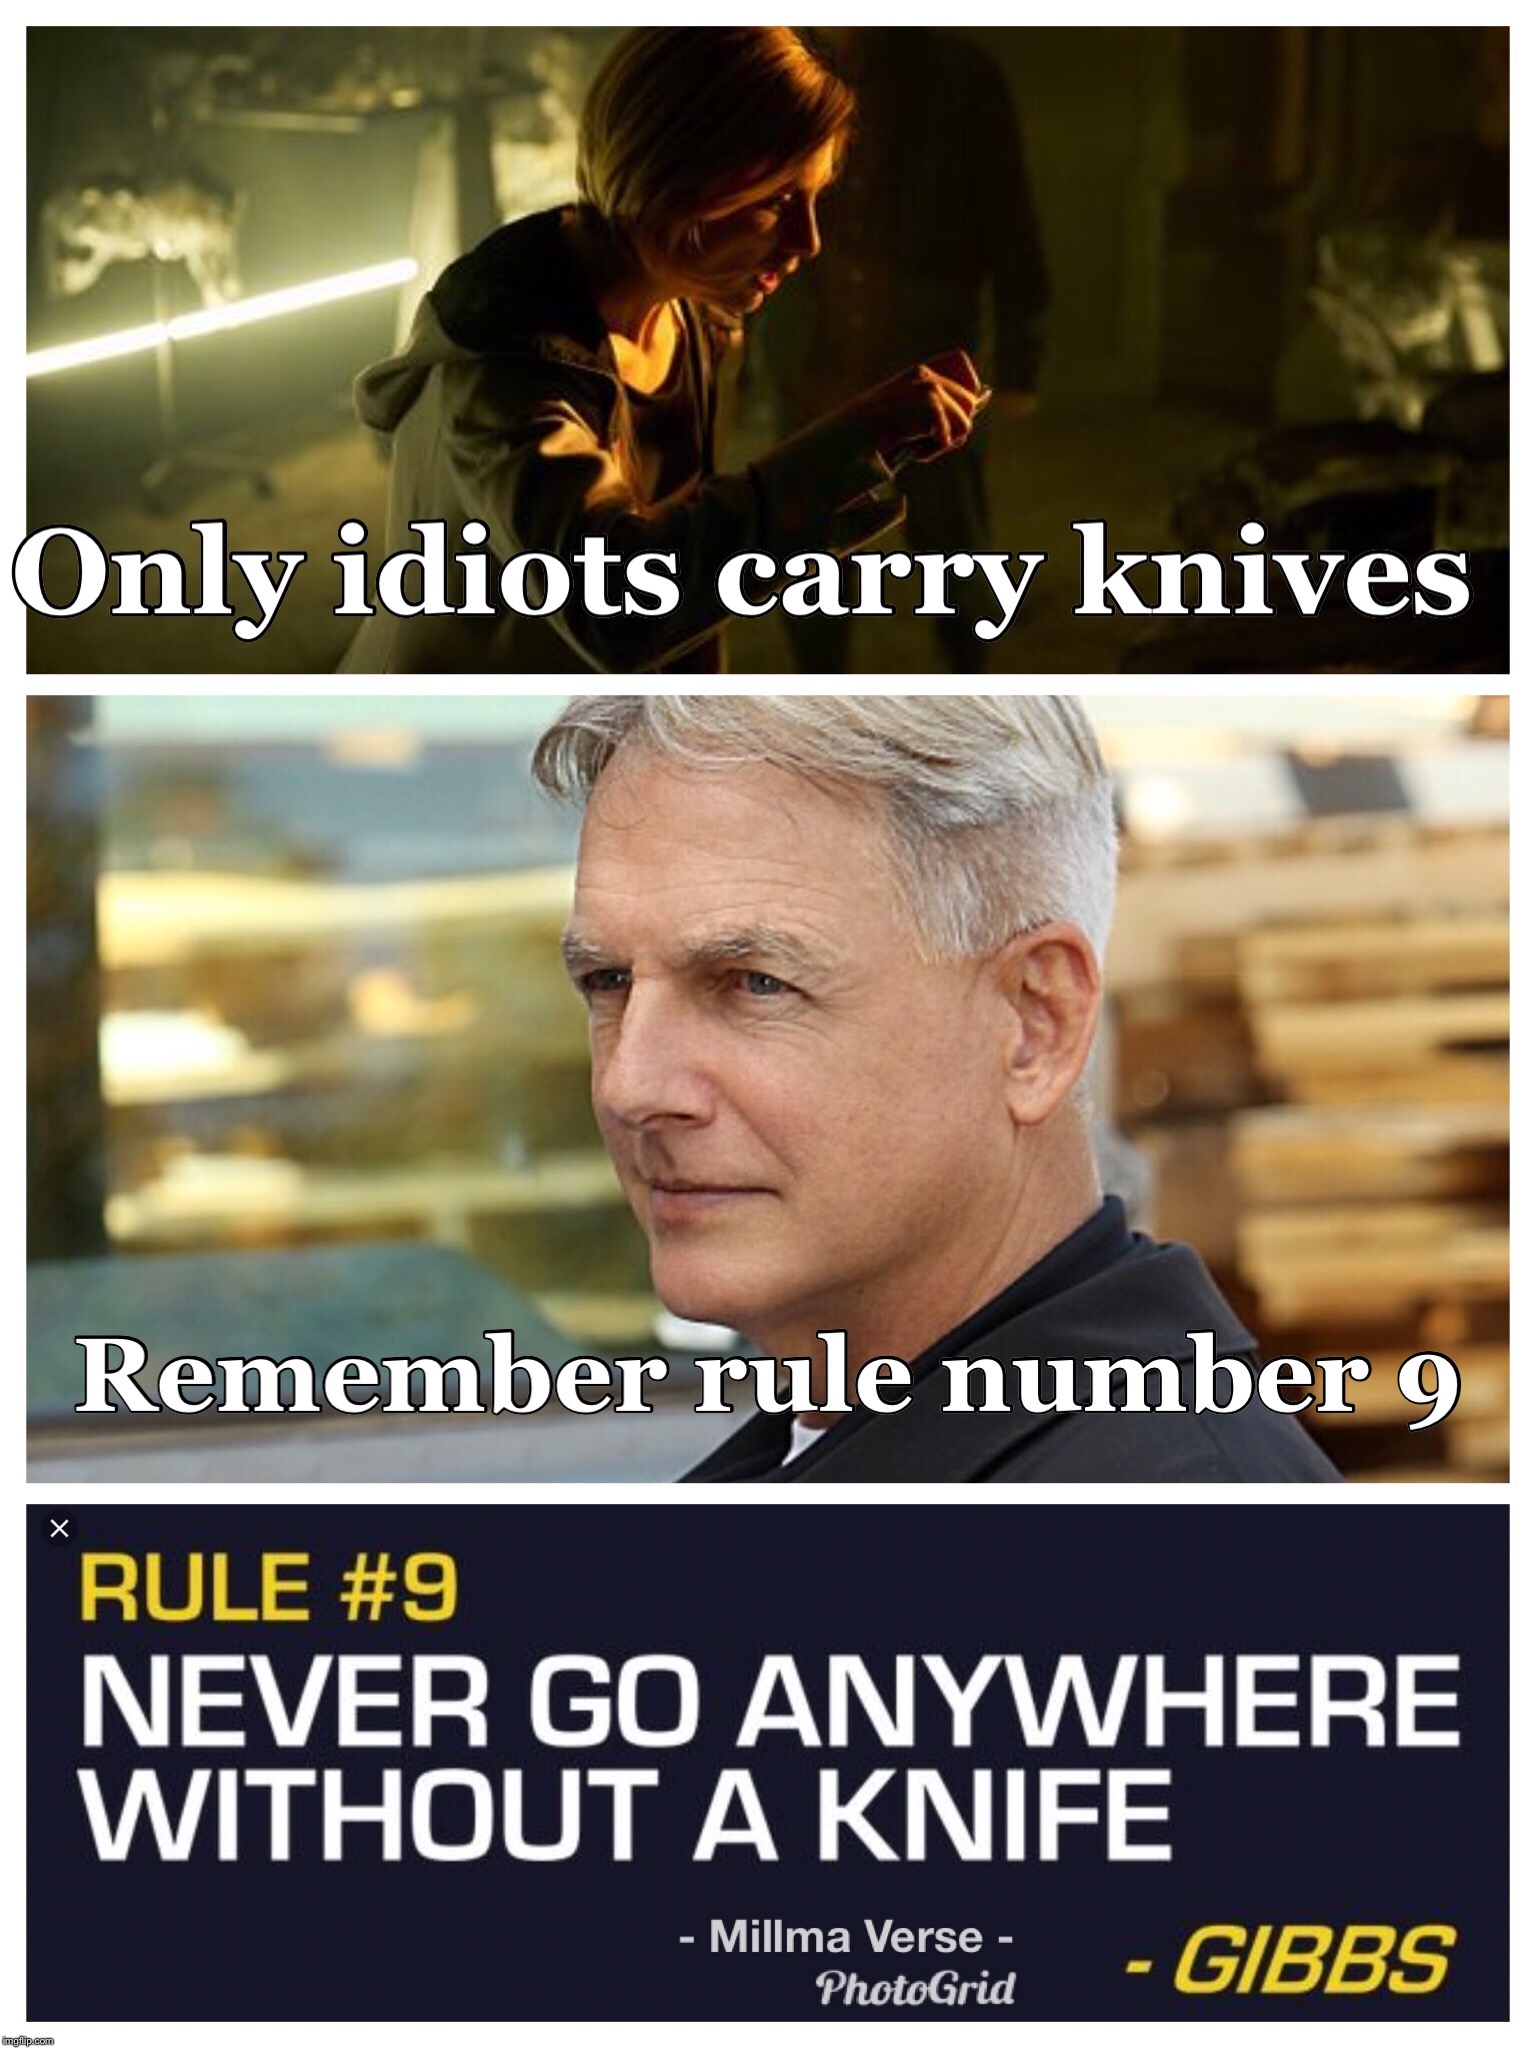 Gibbs Rules Disagree  | image tagged in doctor who,the doctor,ncis,gibbs,gibbs rules | made w/ Imgflip meme maker